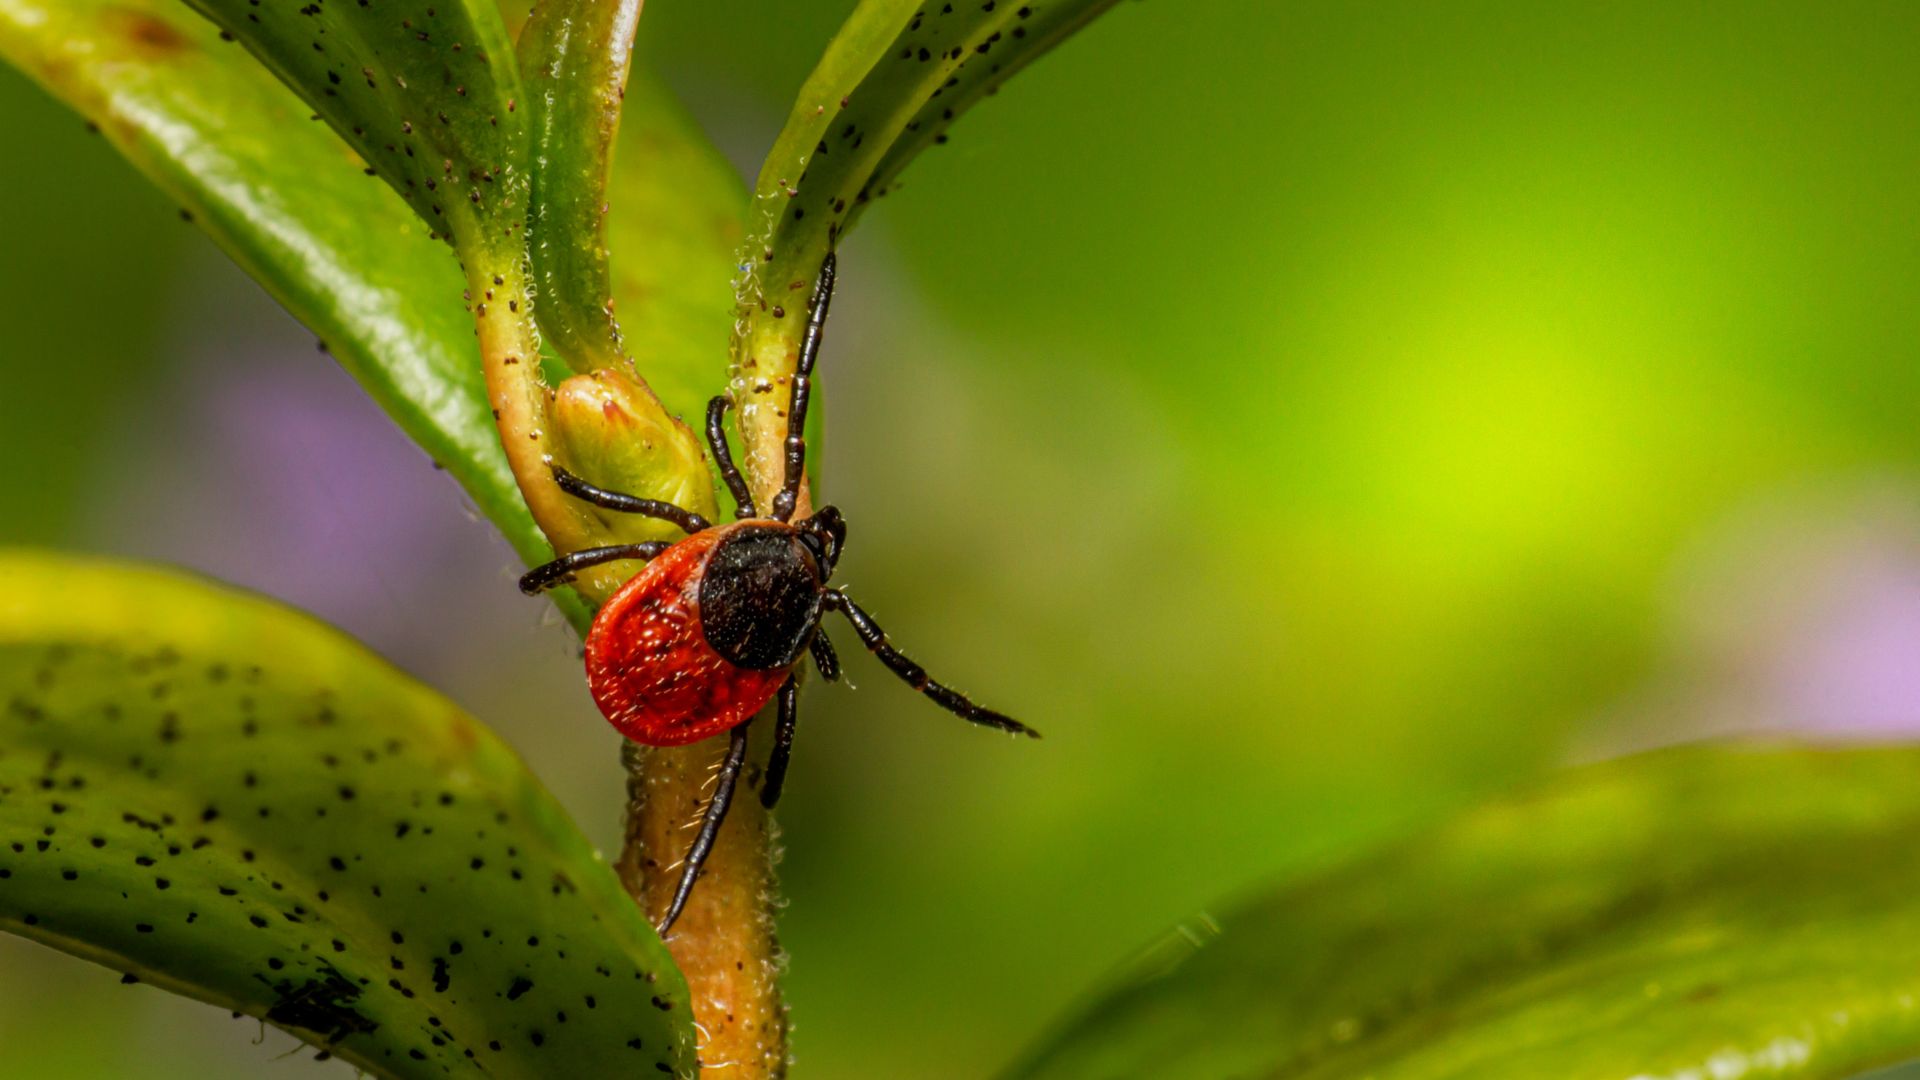 5 Tricks For Banishing Ticks That’ll Help You Enjoy Your Summer Without The Itch